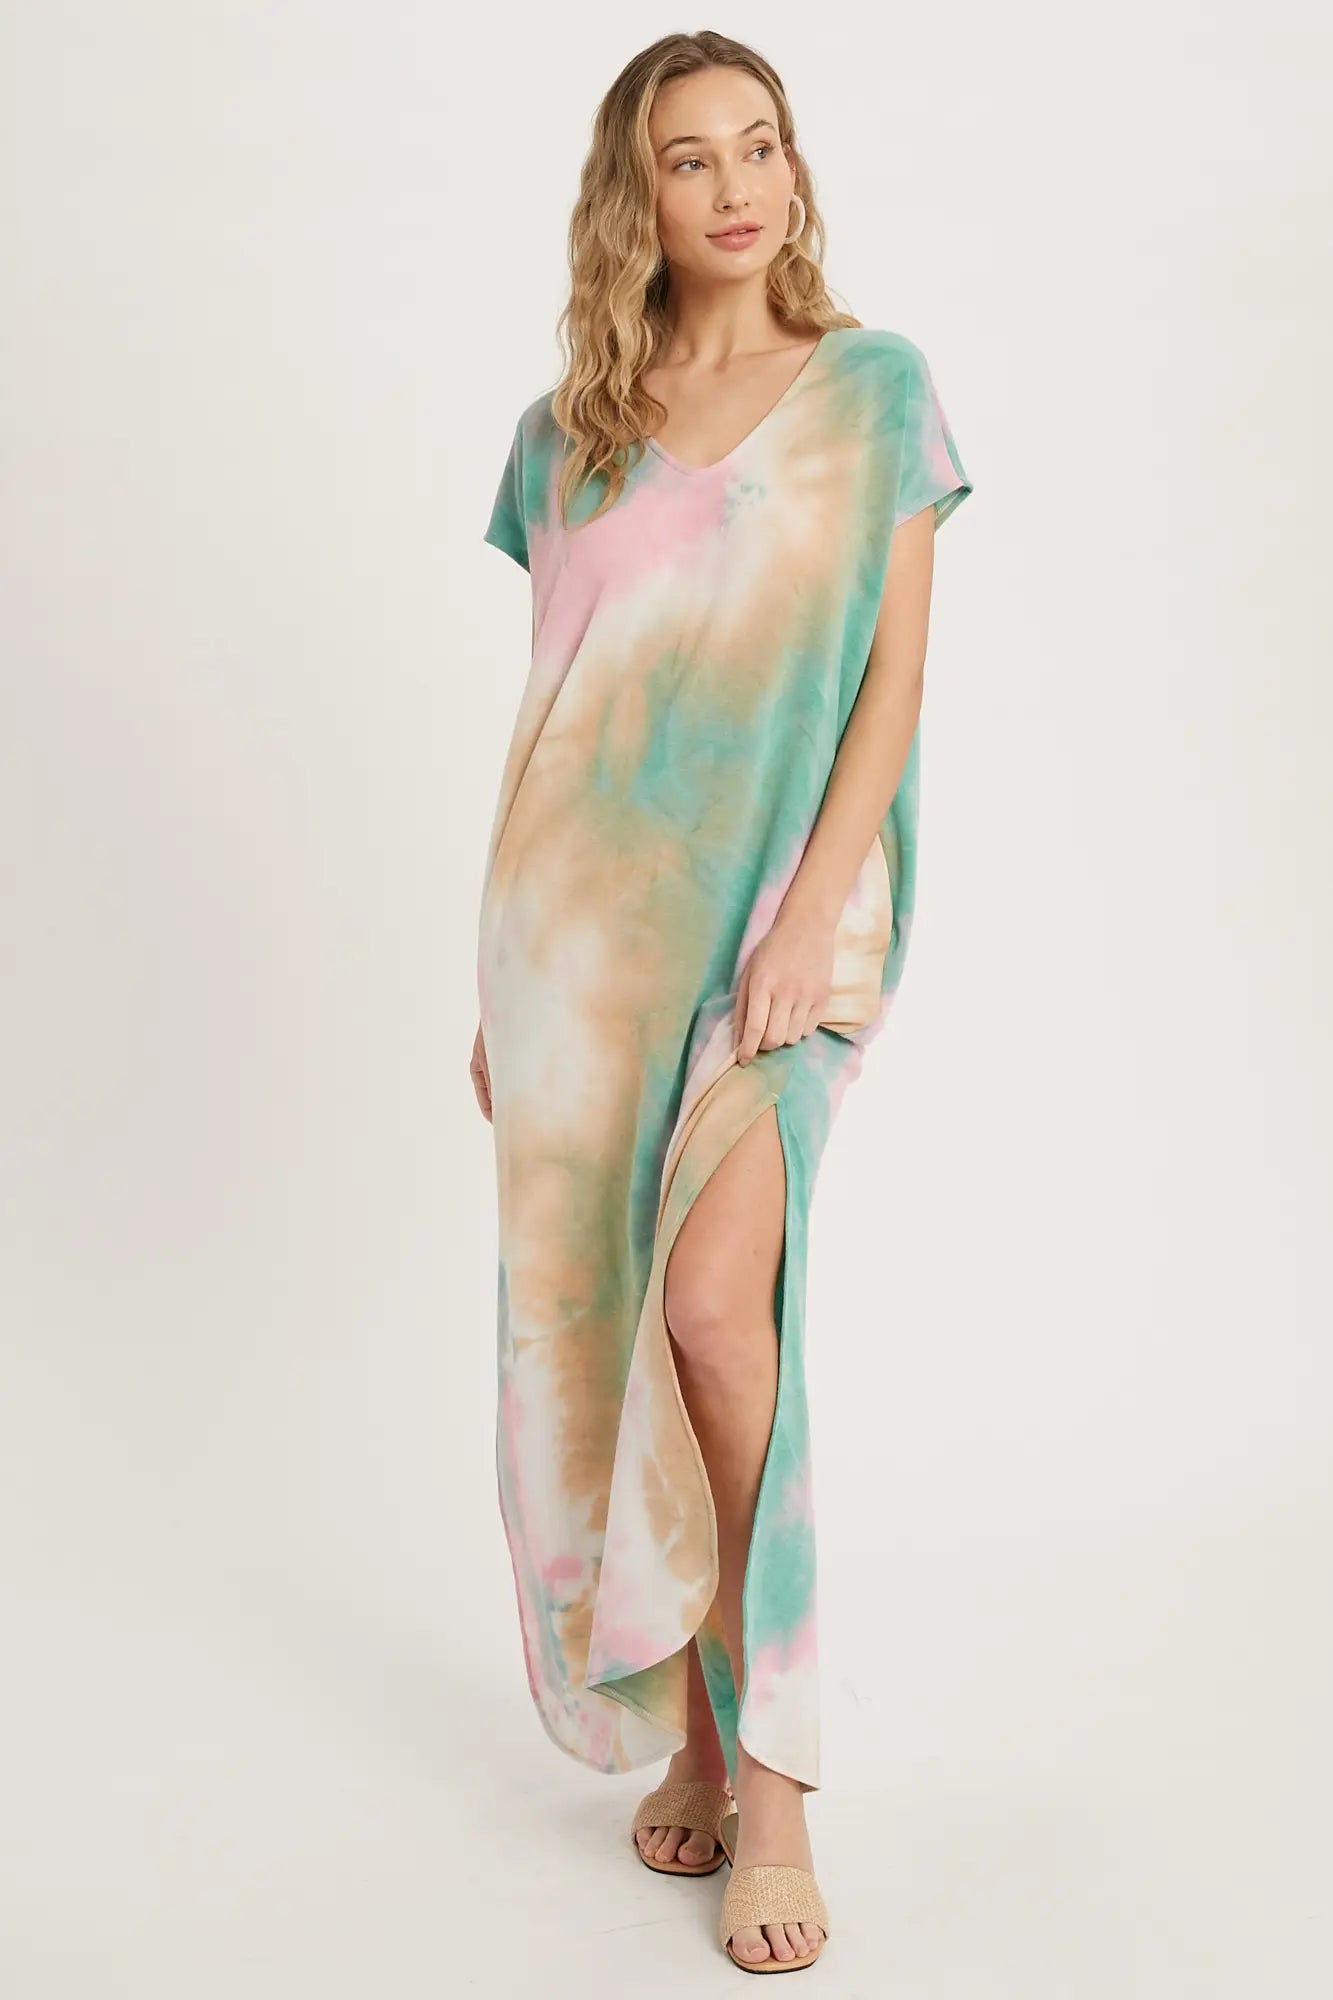 Happiness Tie Dye Maxi Jersey Dress with Pockets